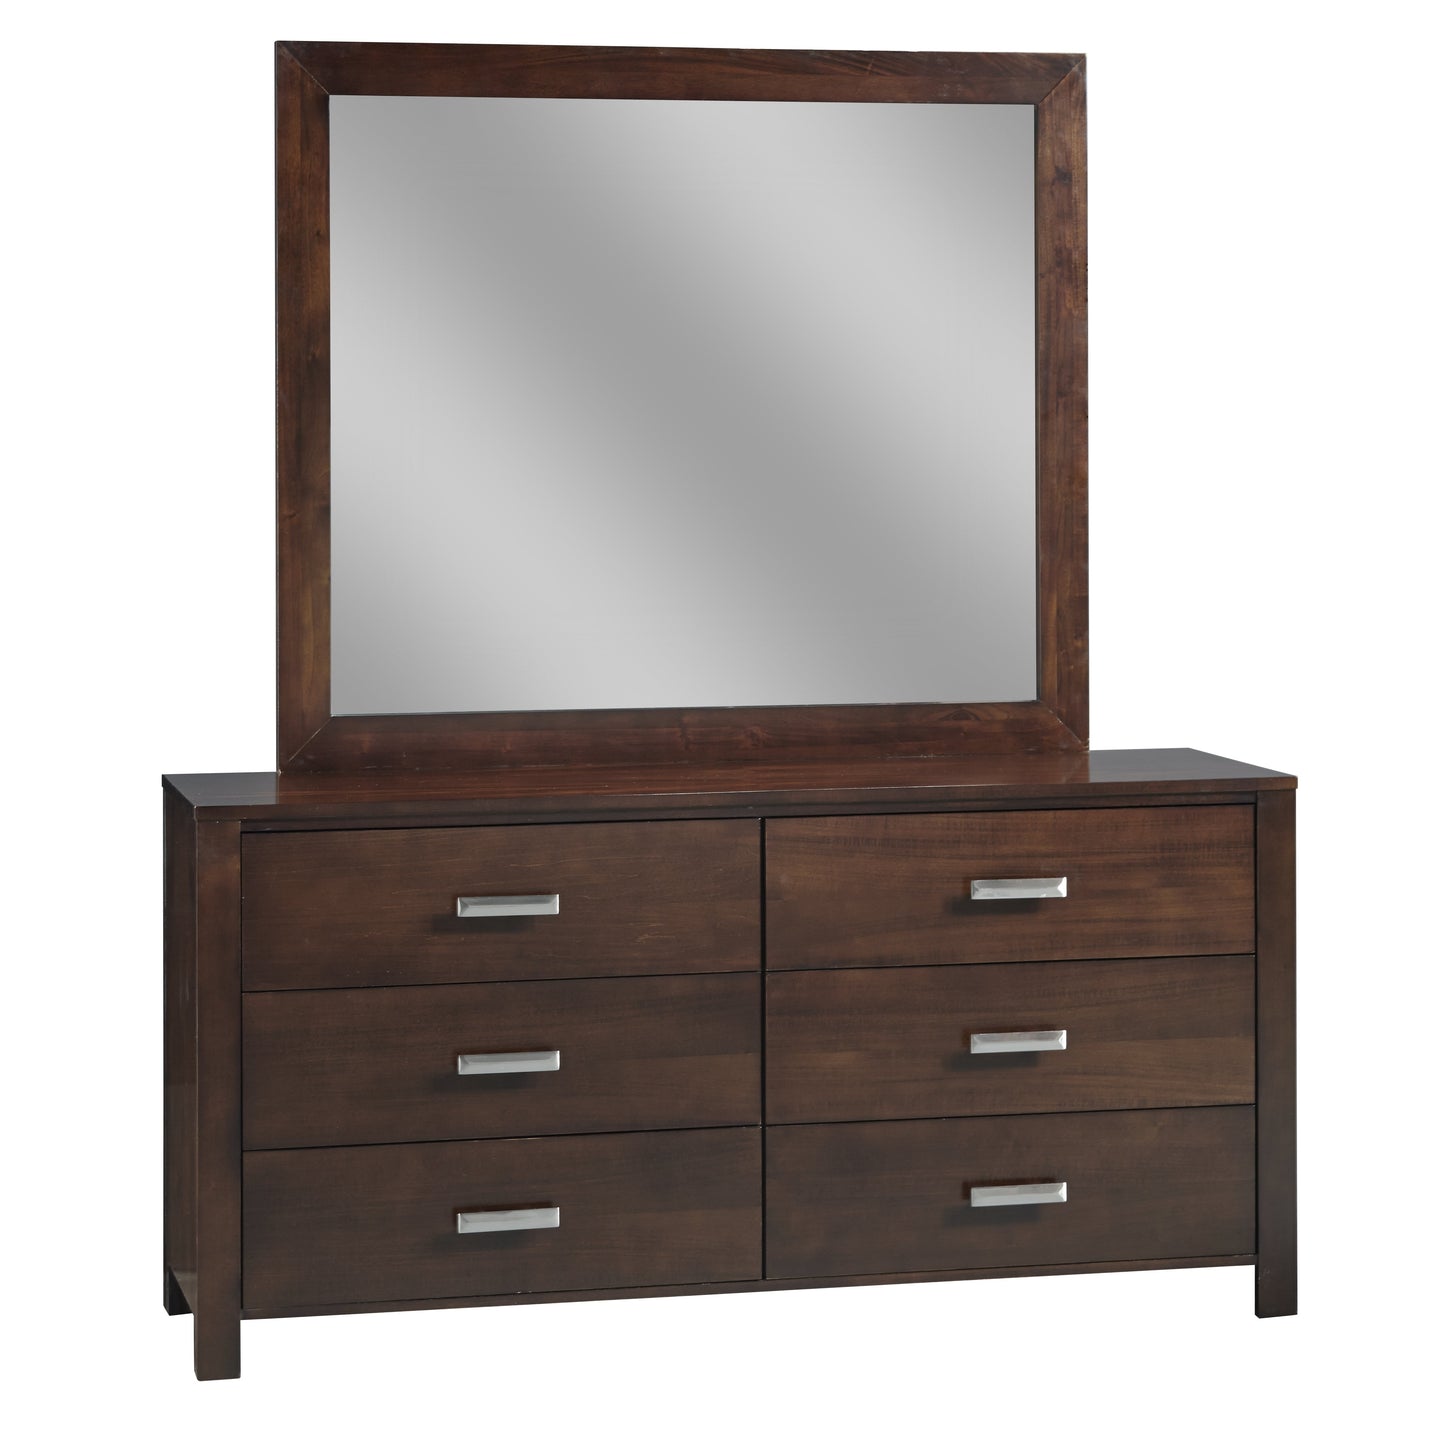 Modus Riva 6PC Twin Storage Bedroom Set in Chocolate Brown